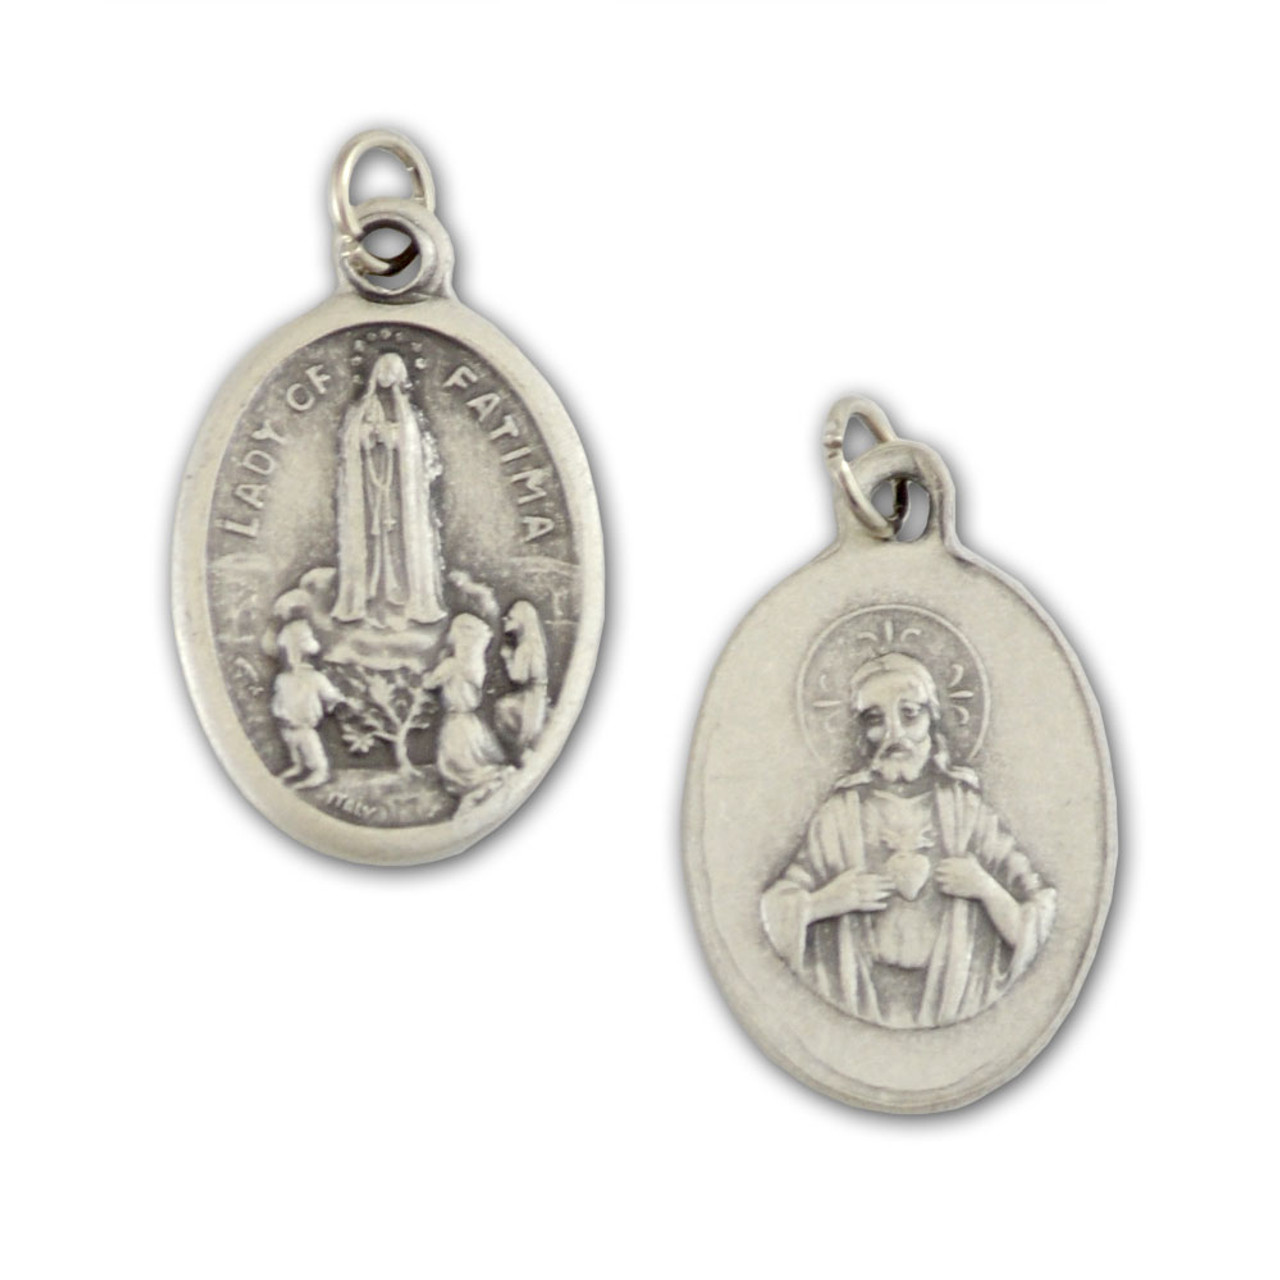 Our Lady of Fatima Devotional Medal